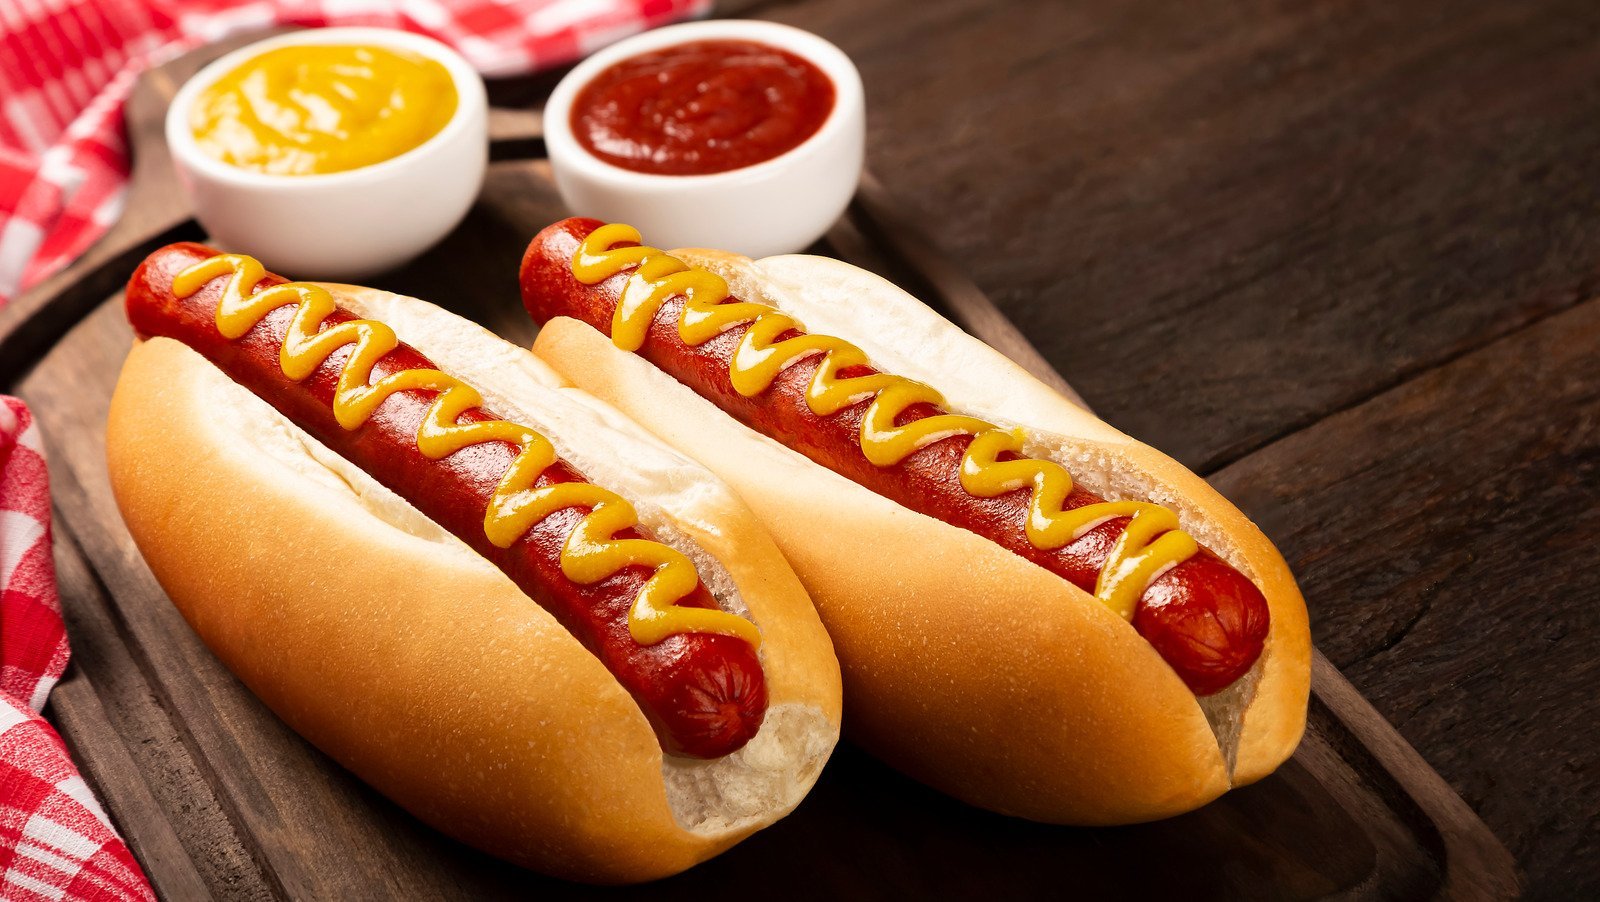 Ranking 12 Fast Food Hot Dogs From Worst To Best